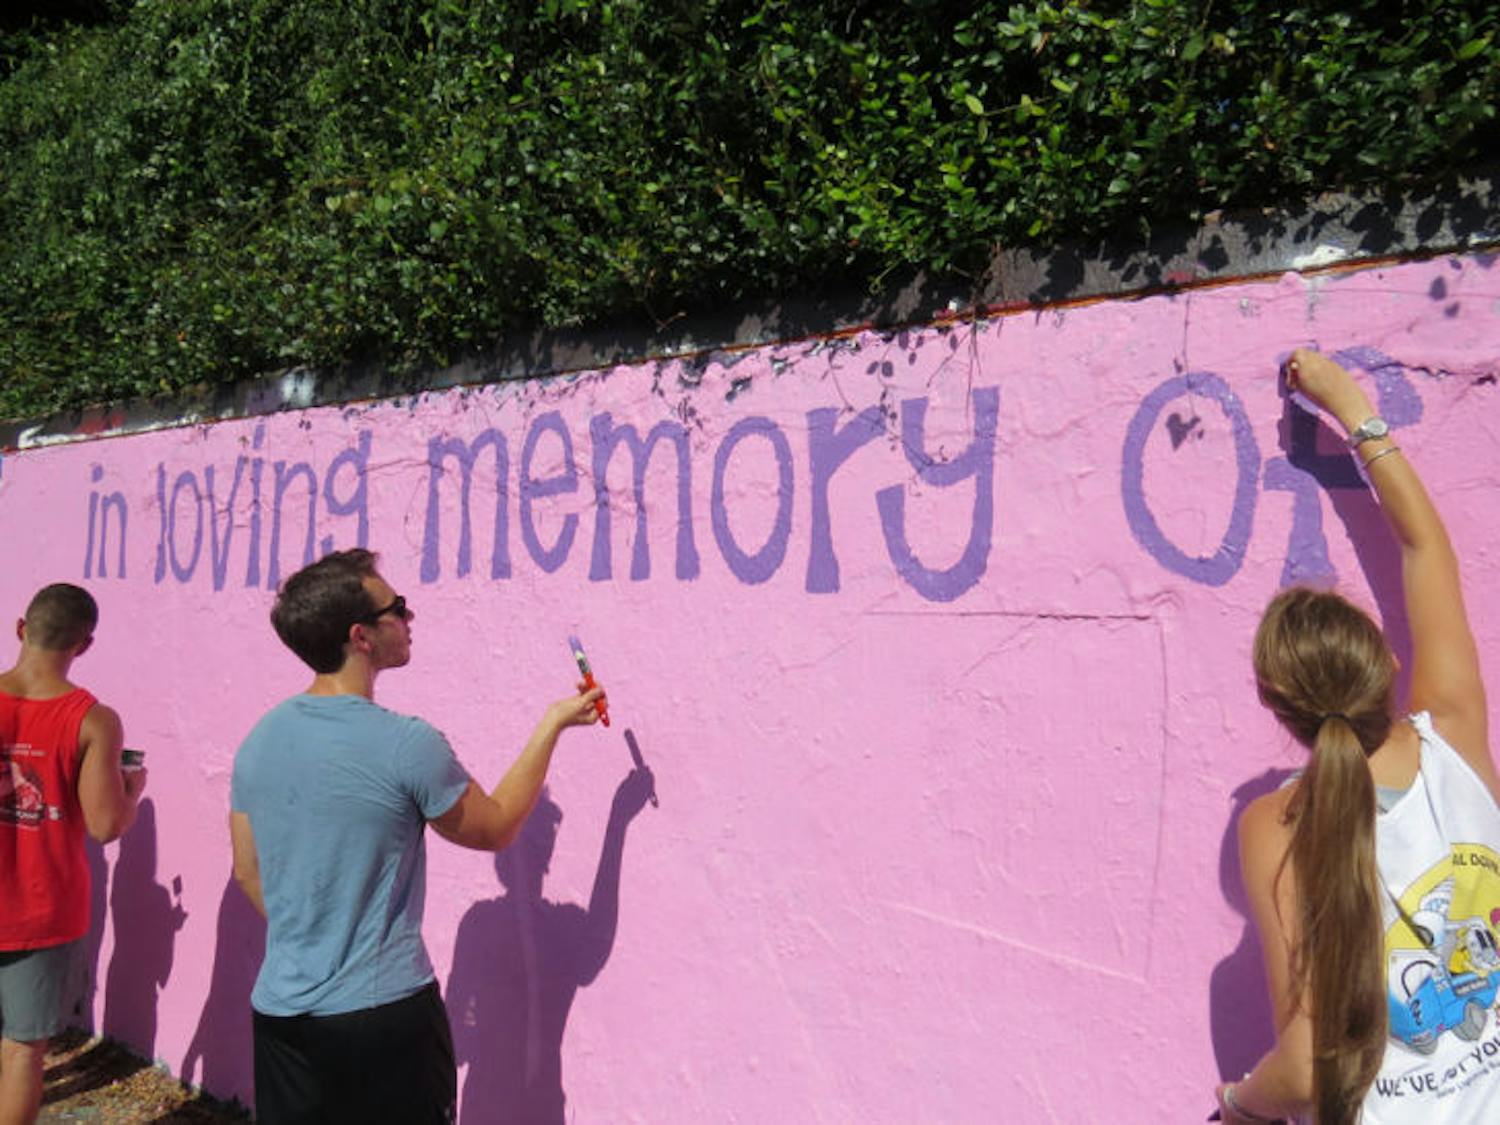 Recreation, parks and tourism junior Paige Gross, right, and biology senior Matt Seskin, center, paint the 34th Street Wall with friends Sunday in memory of Lauren Marcus, a recent UF graduate who died Aug. 19.